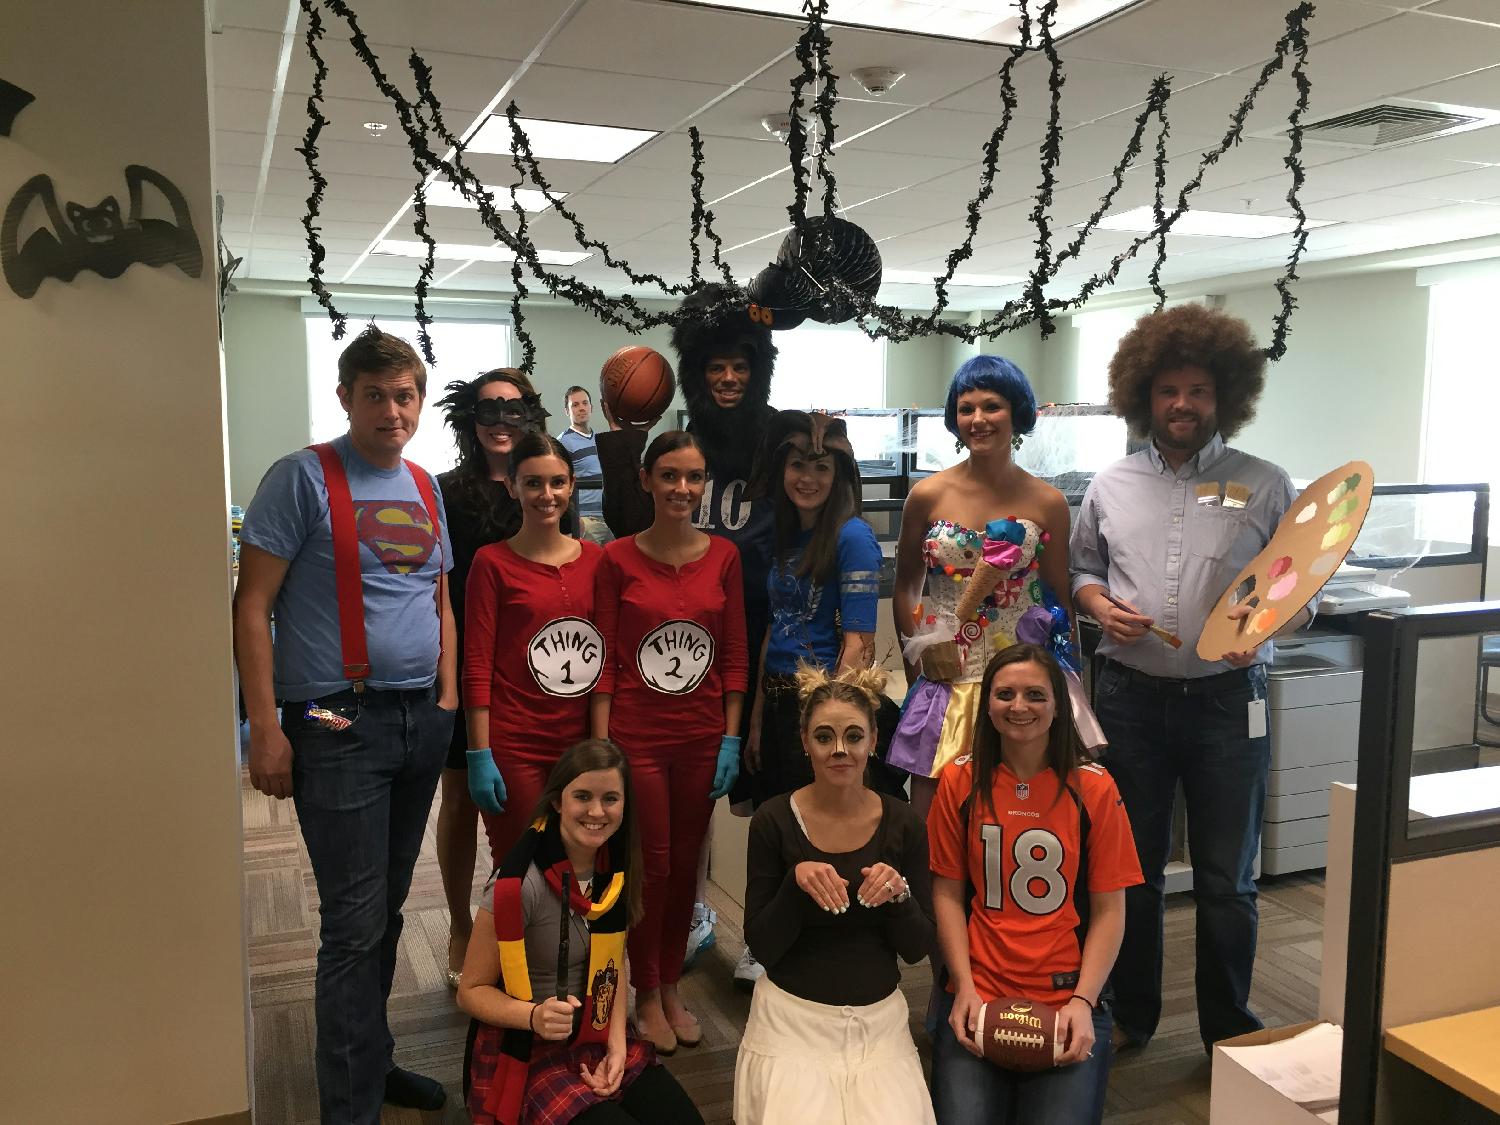 We encourage teams to dress up on Halloween and see who can come up with the most creative and original costume.